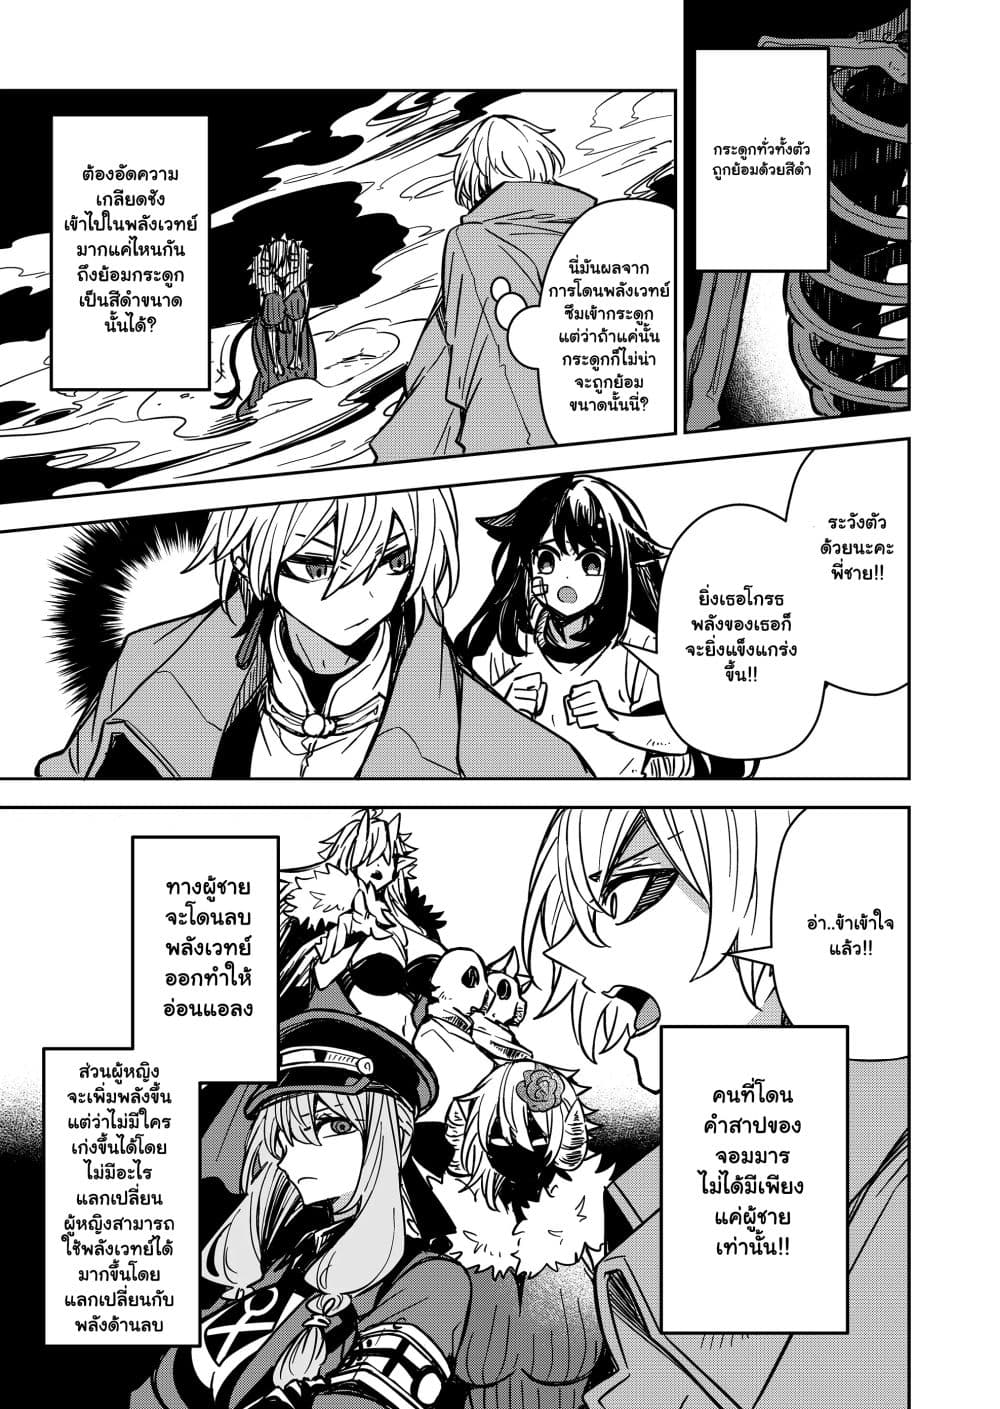 The Return of the Retired Demon Lord ตอนที่ 5.1 (9)